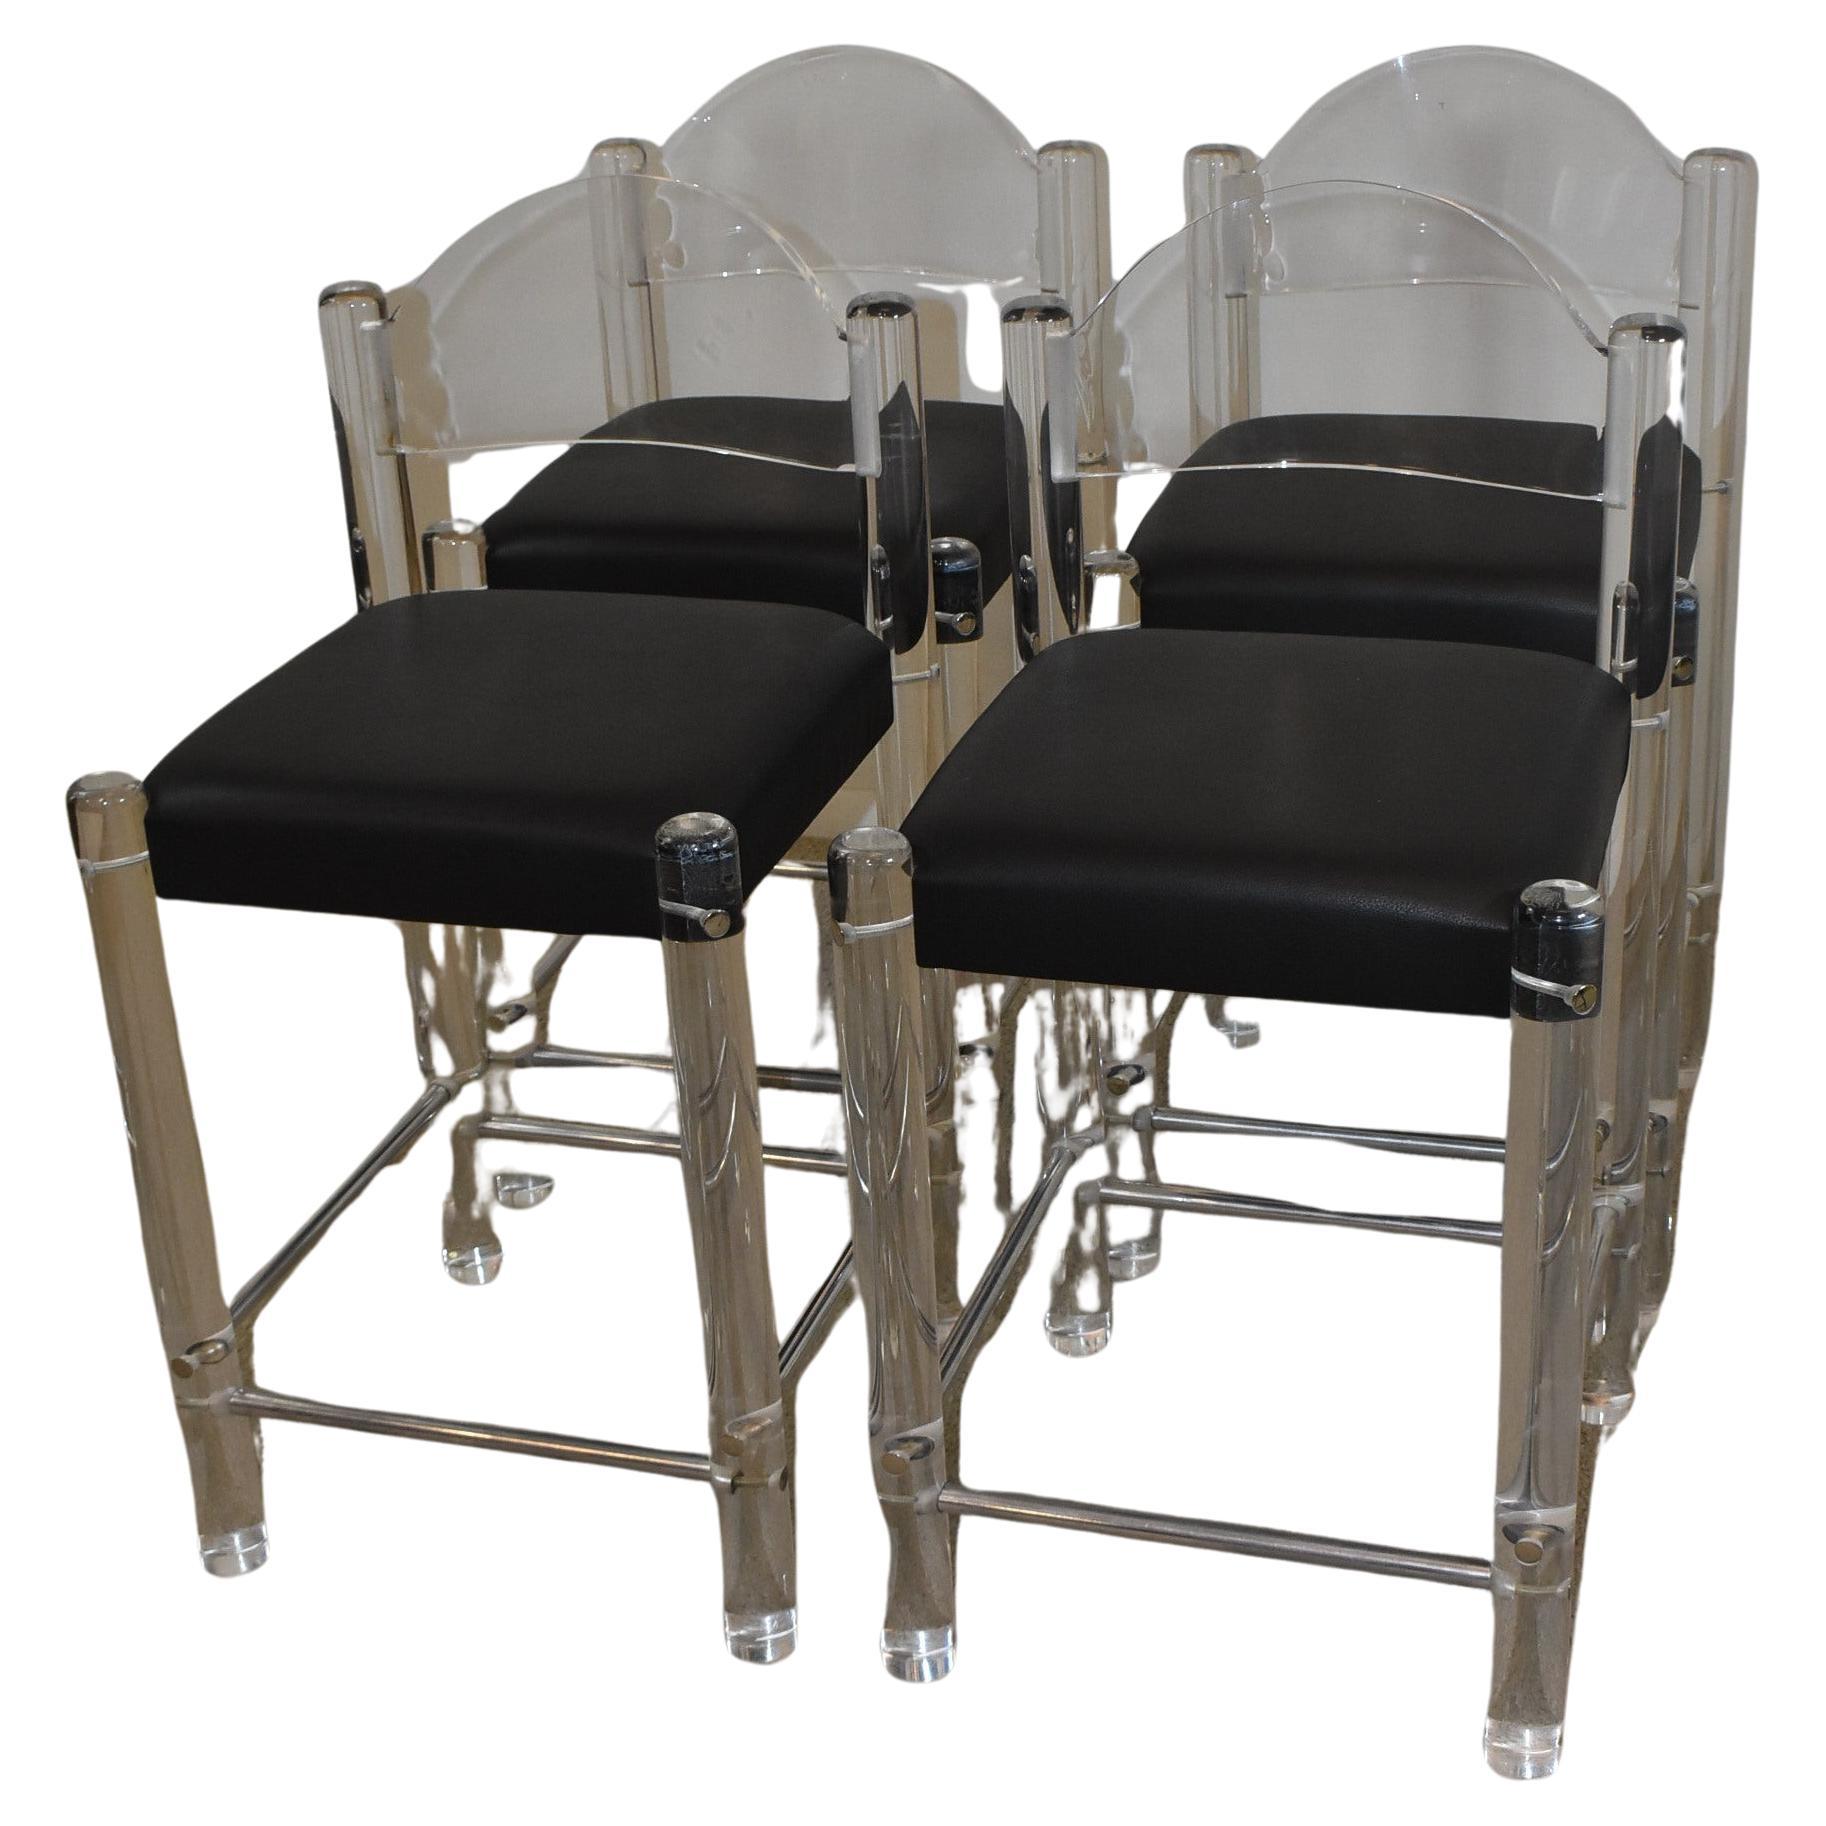 Acrylic Bar Stools with Black Leather Seats For Sale